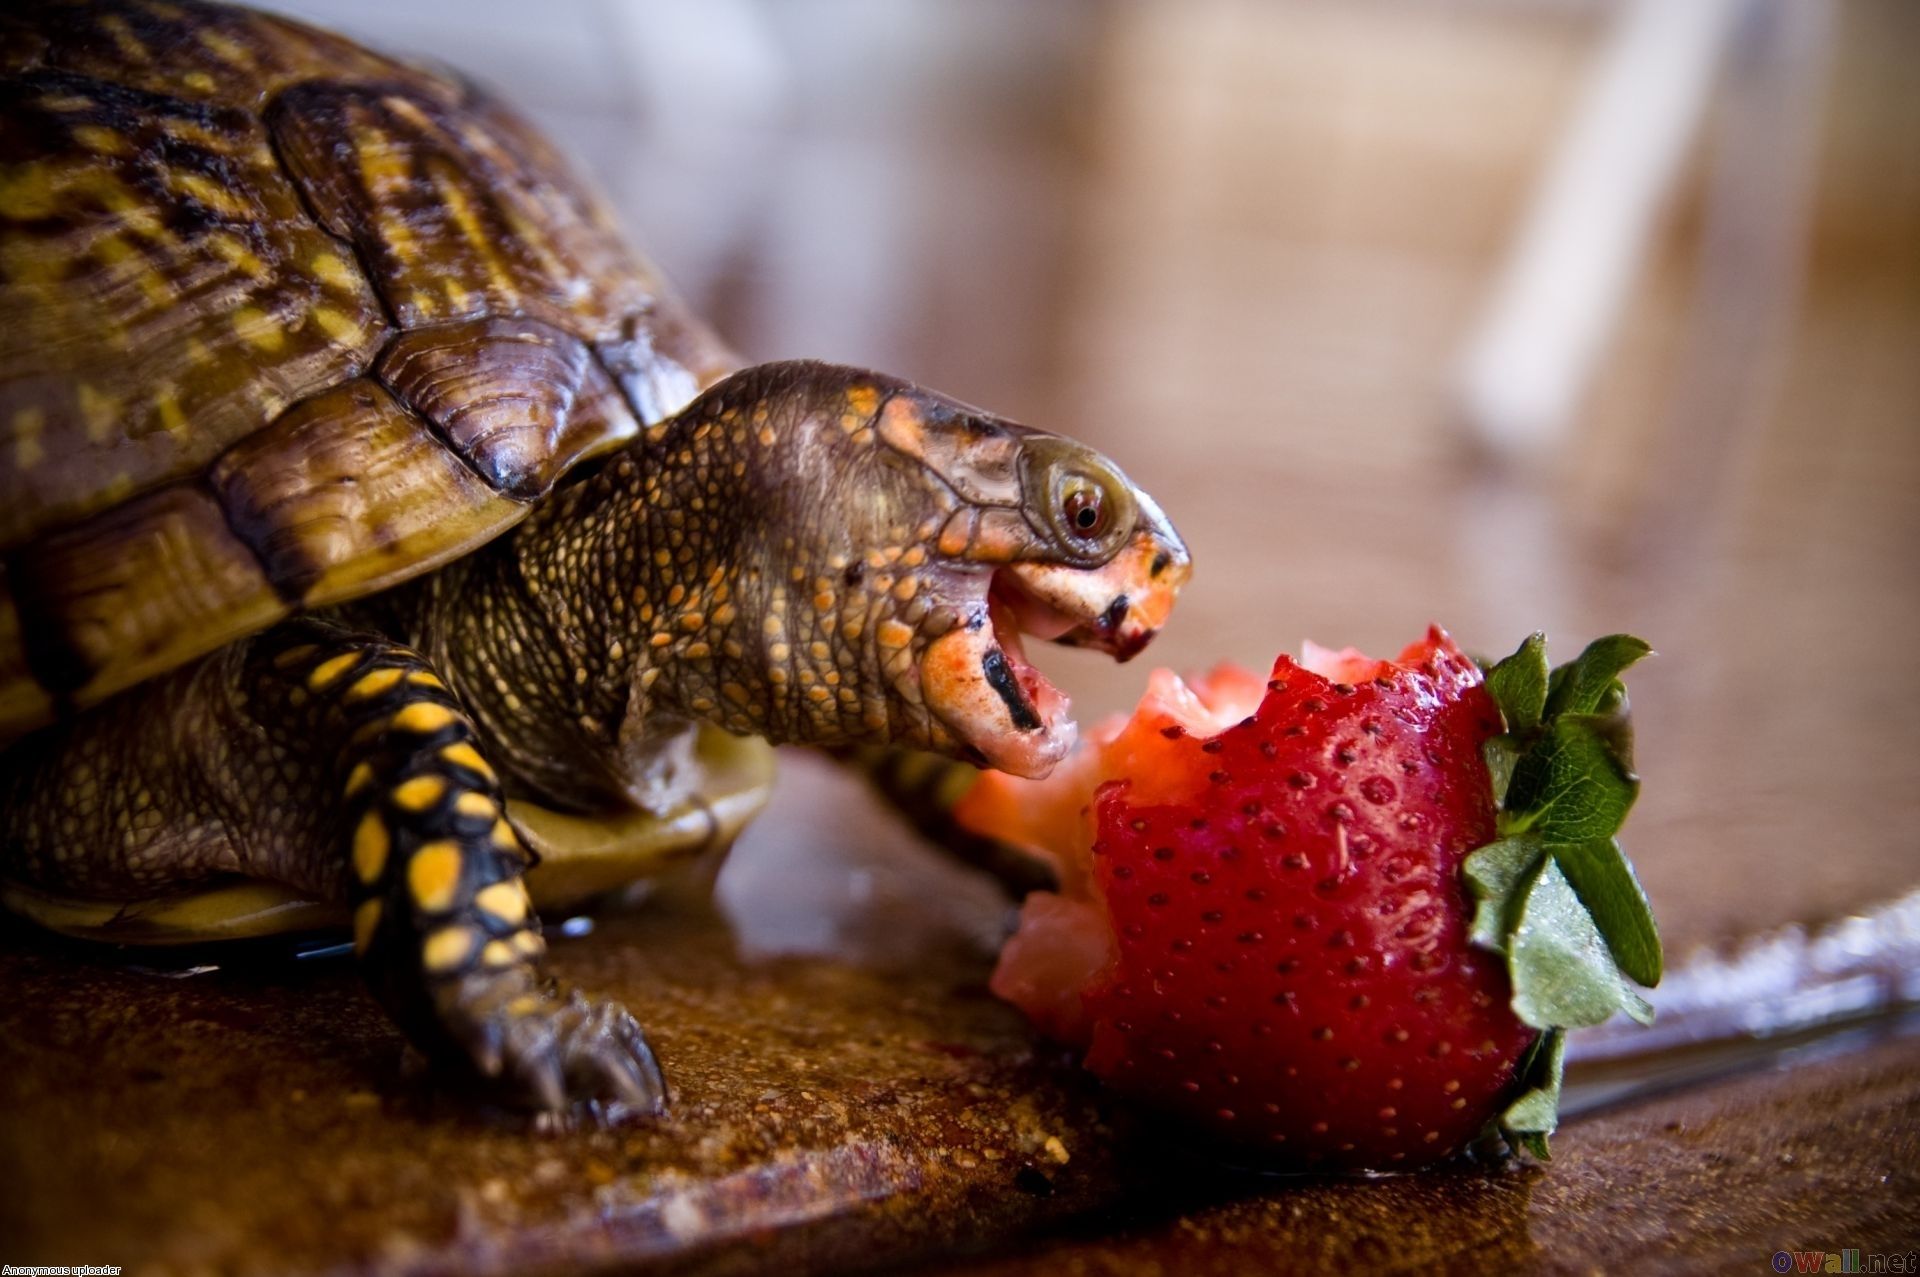 I gave that turtle a strawberry.